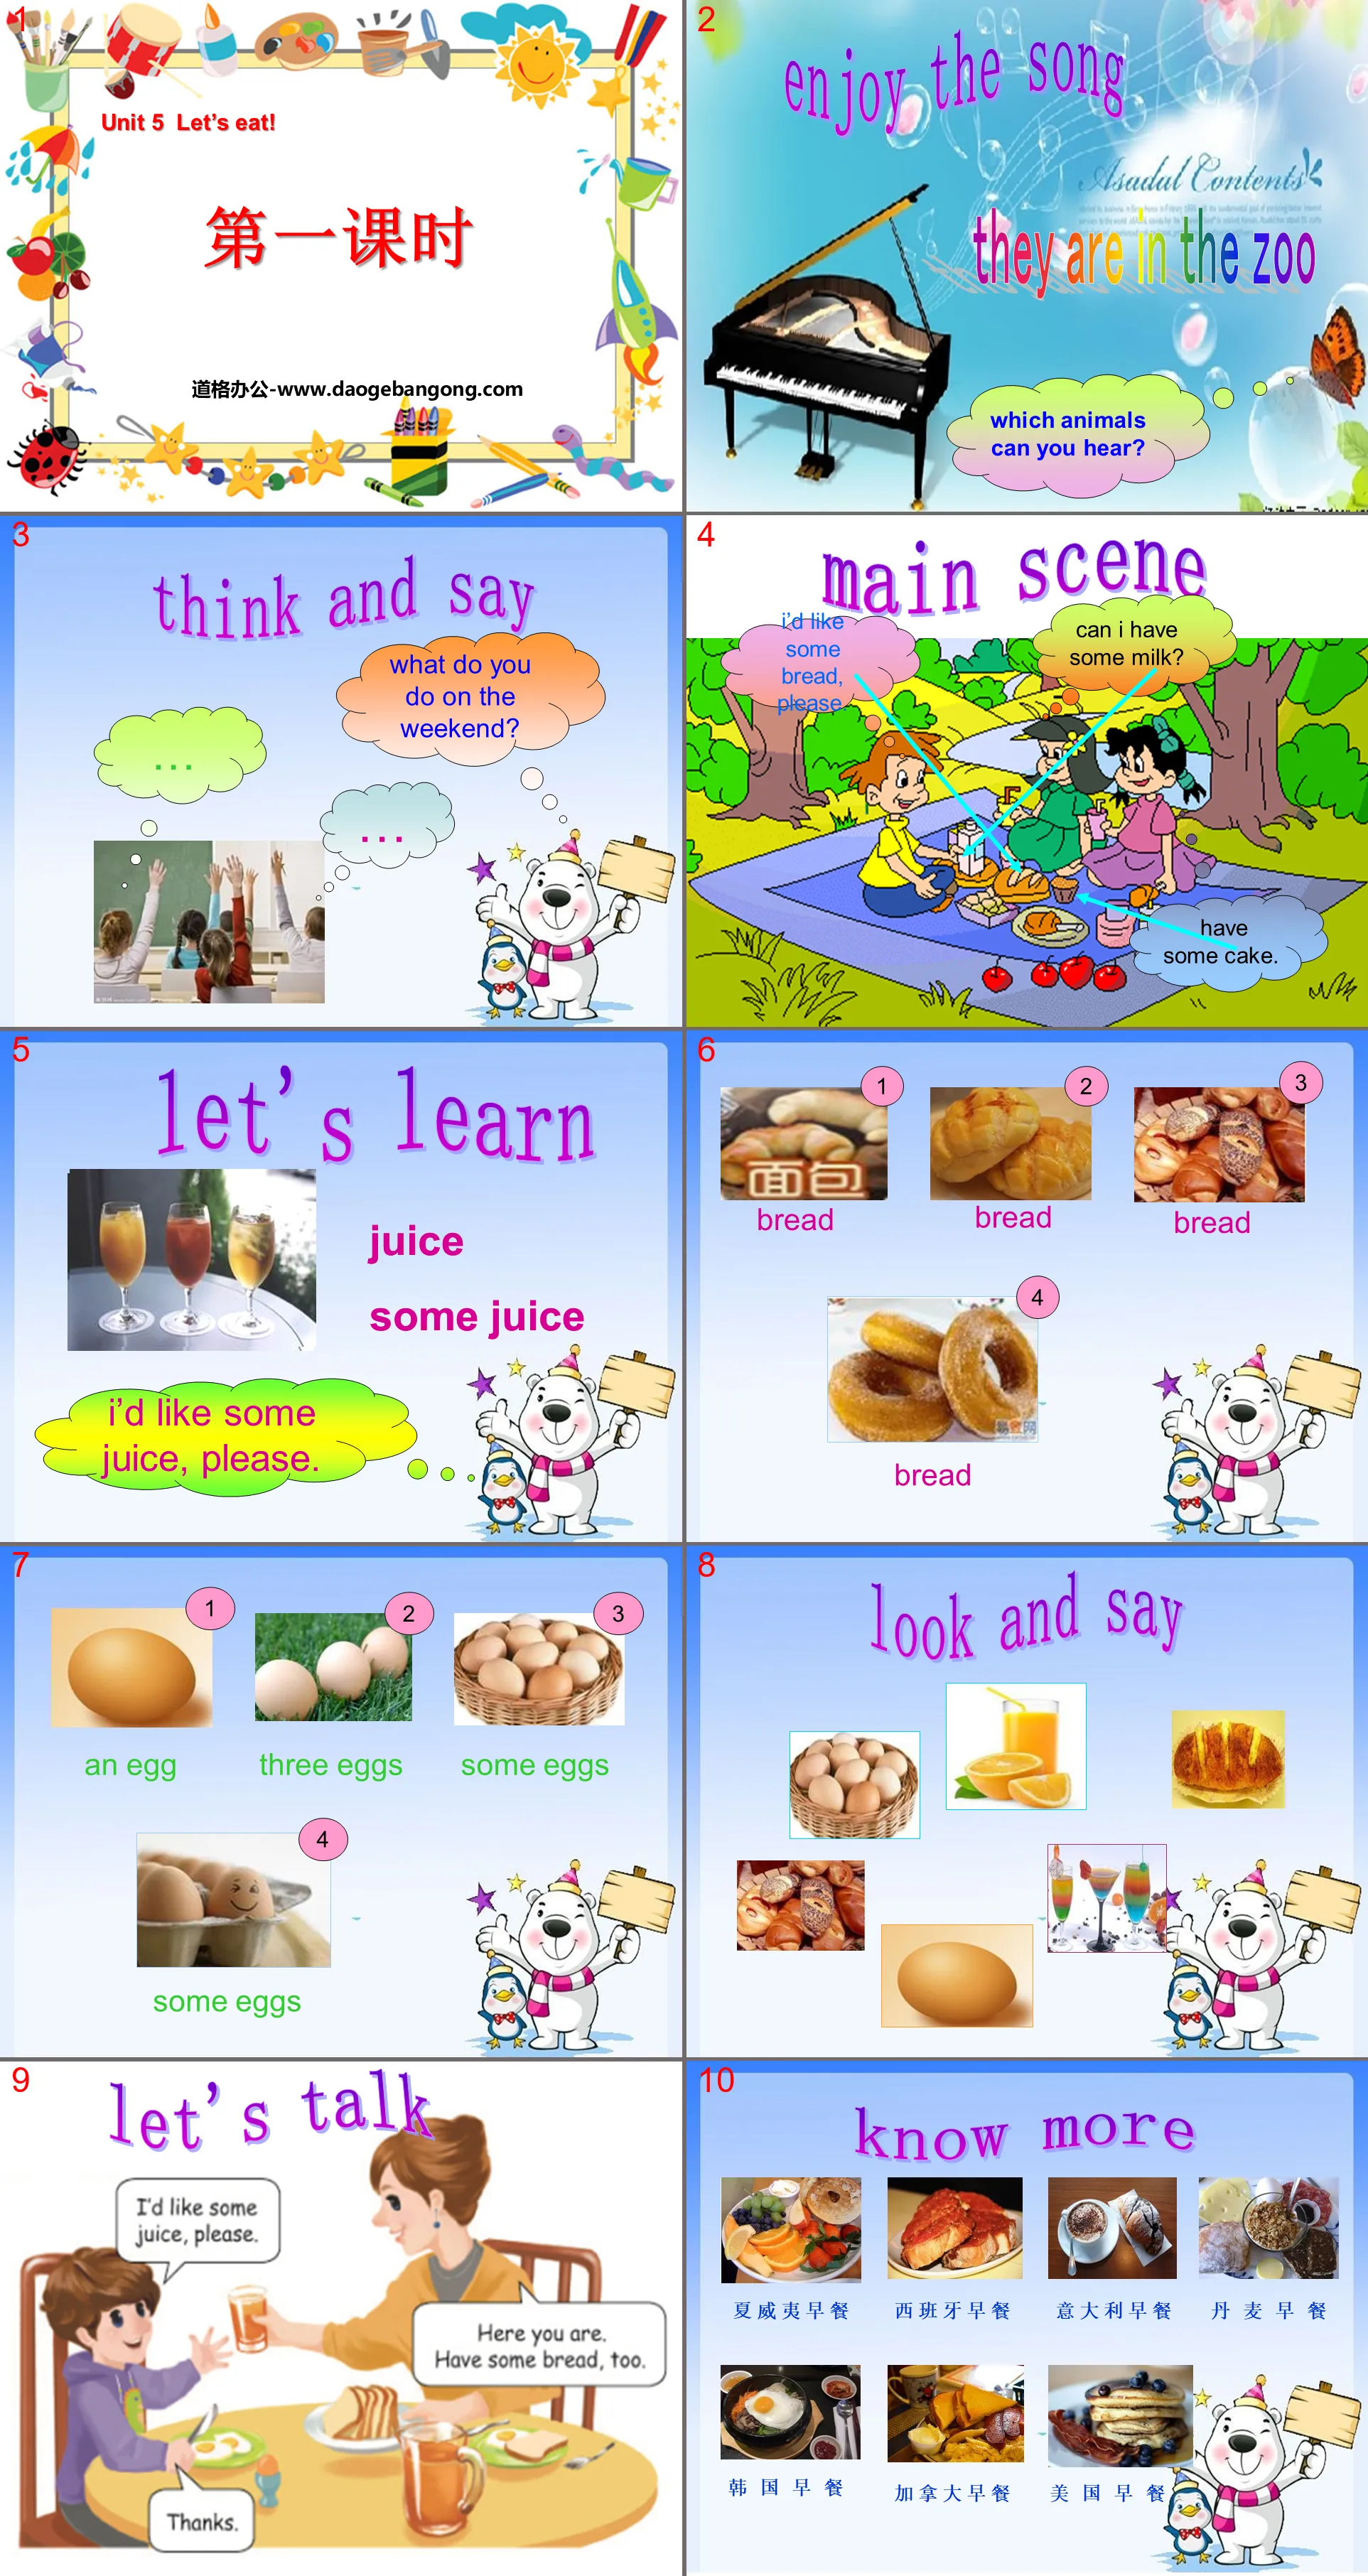 "Unit5 Let’s eat!" PPT courseware for the first lesson